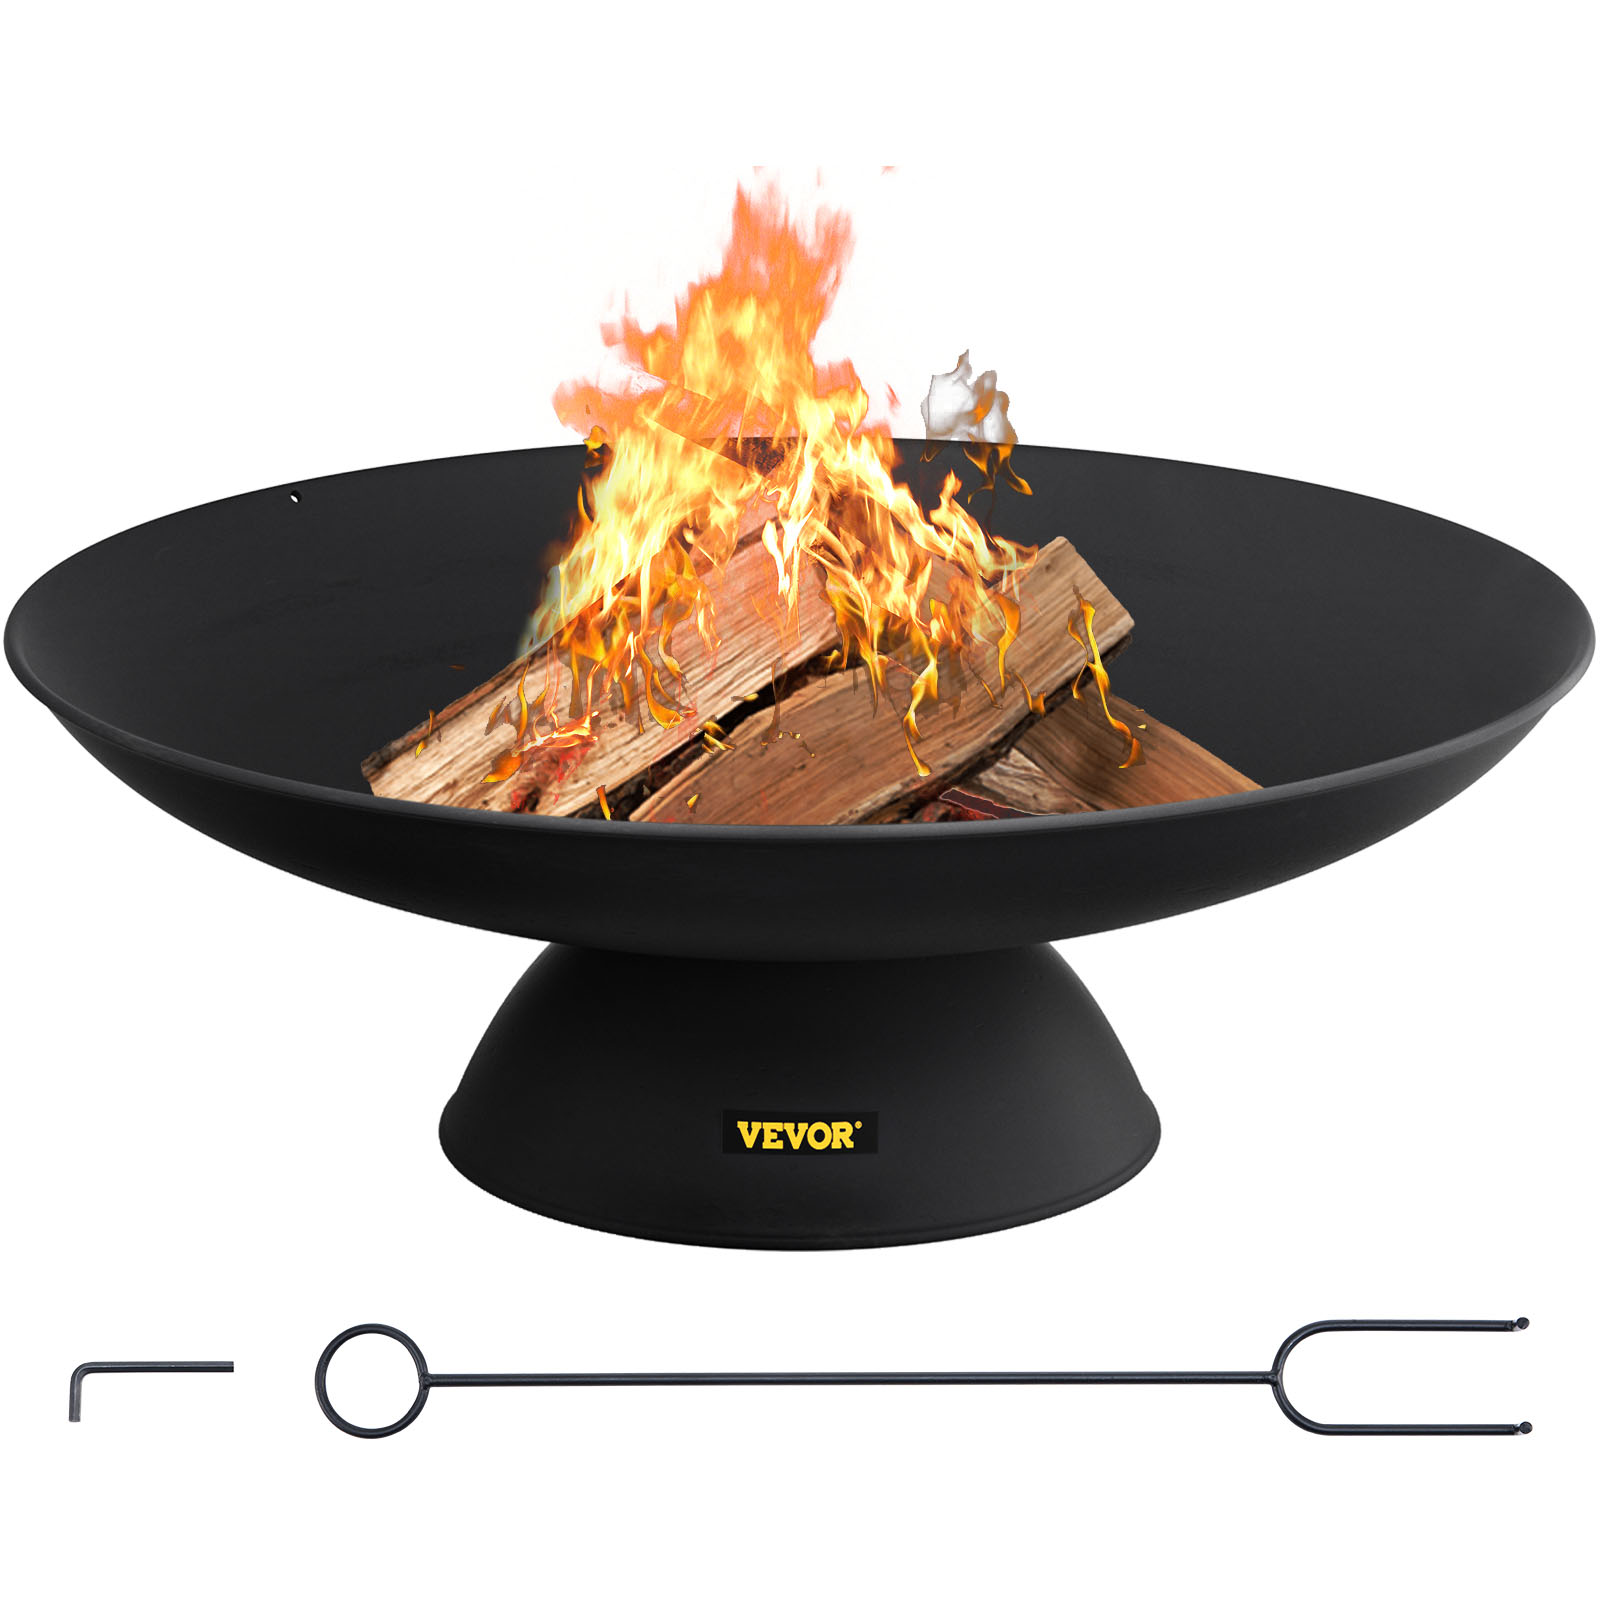 VEVOR Fire Pit Bowl Round Fire Pit 30-Inch Cast Iron Outdoors Patio Portable от Vevor Many GEOs